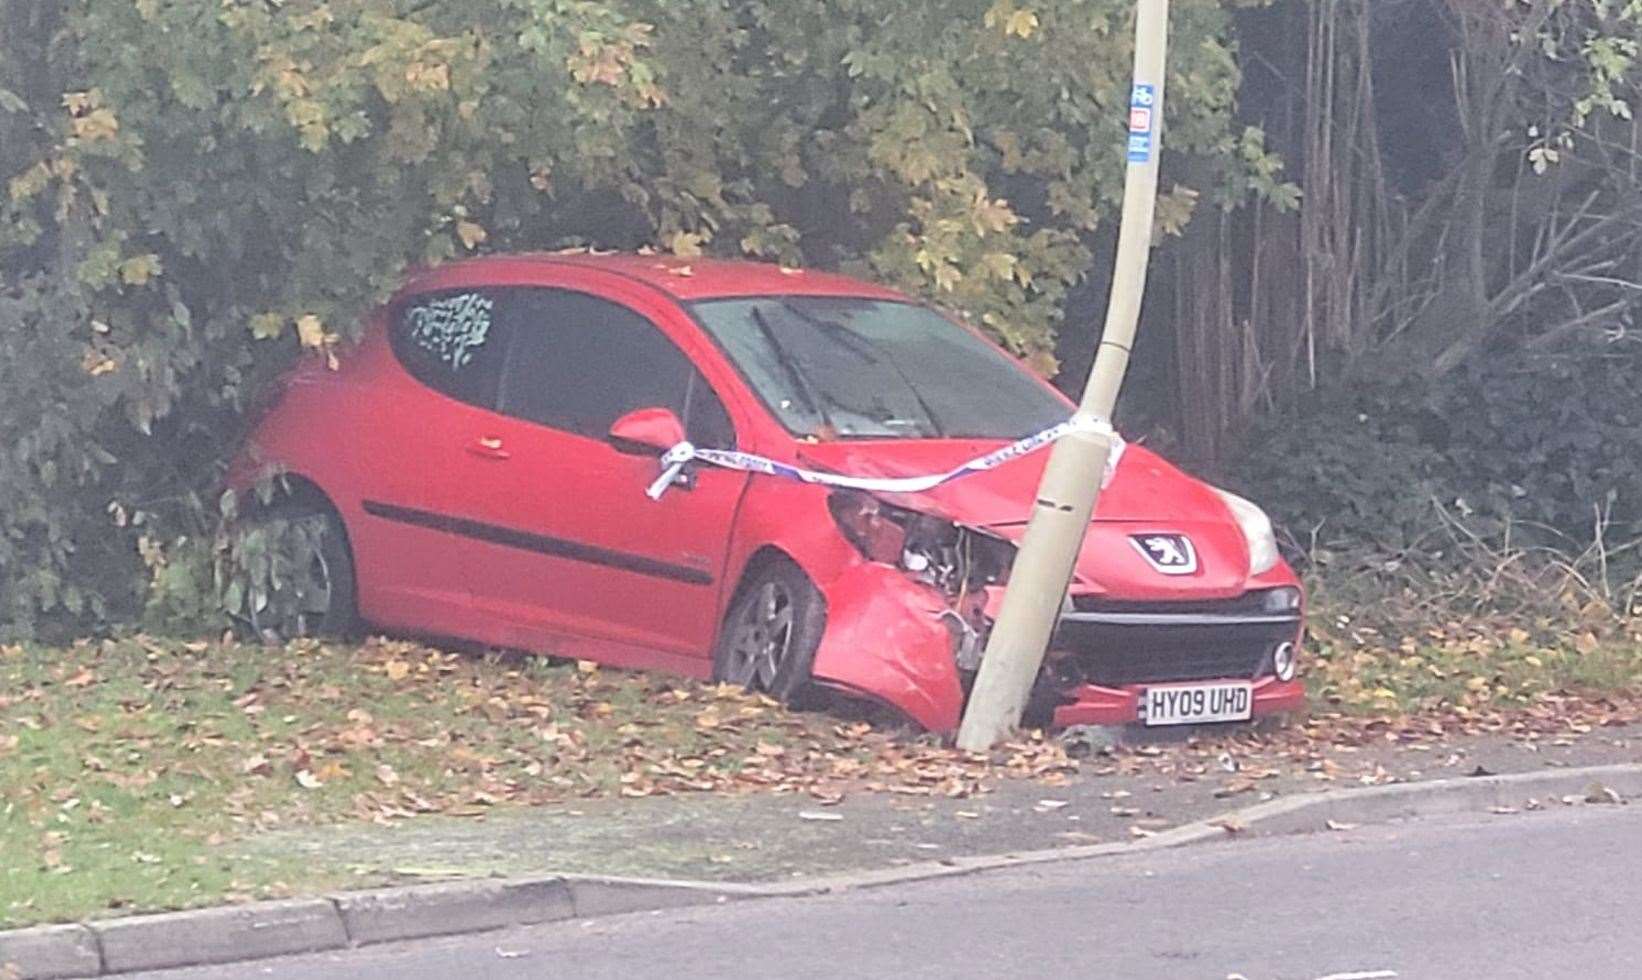 The front driver’s side of the Peugeot 207 has been badly damaged